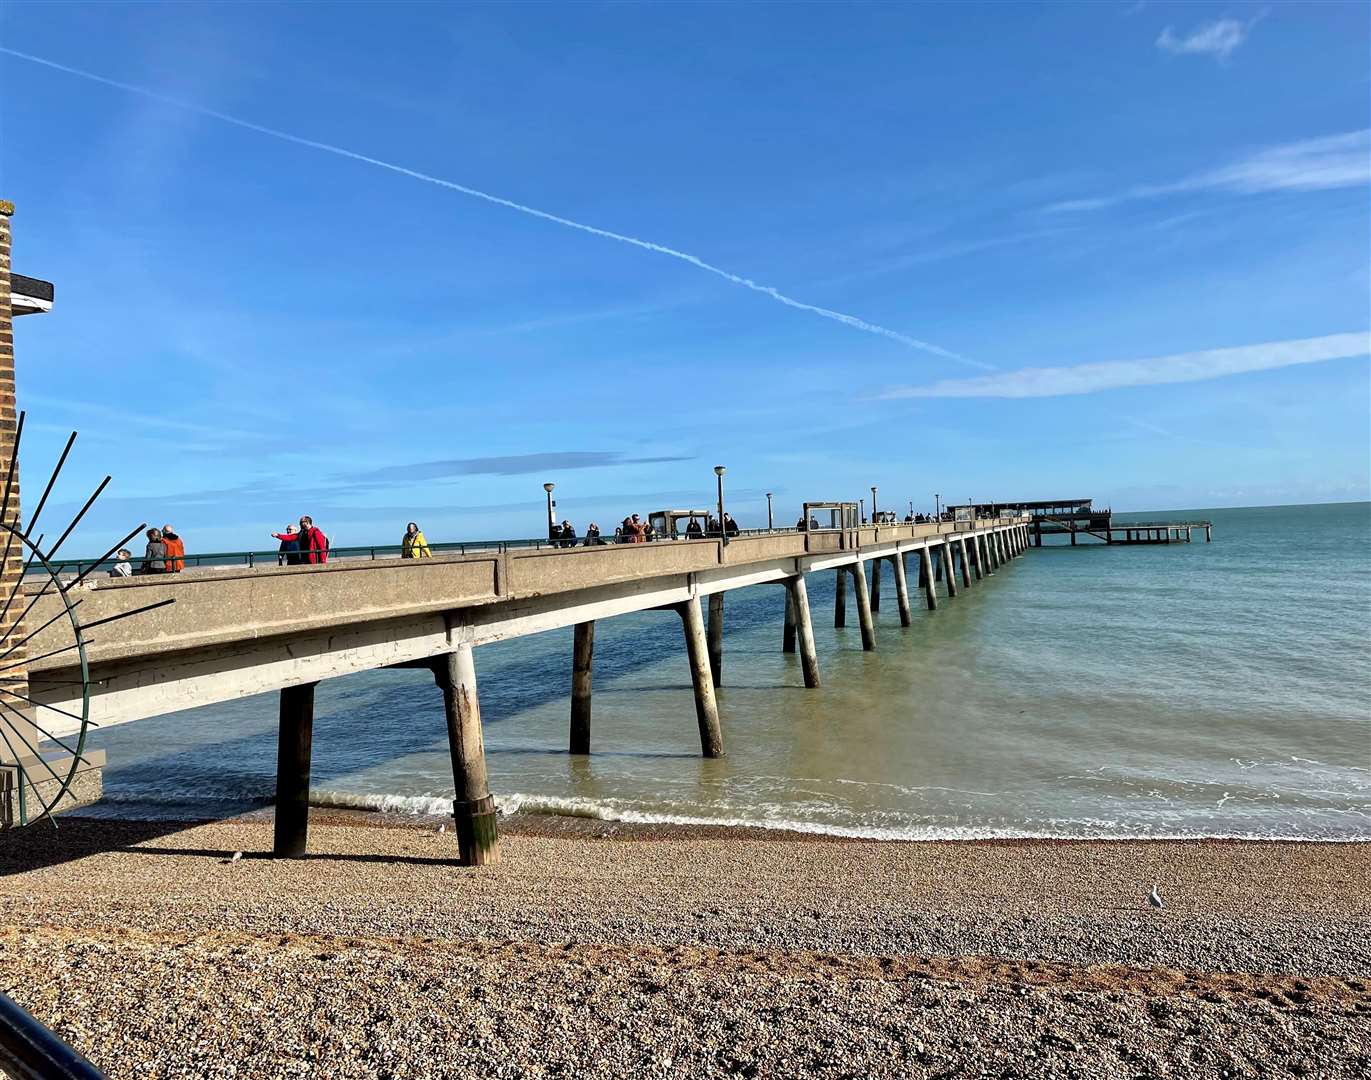 Deal Pier attracts thousands of visitors every year